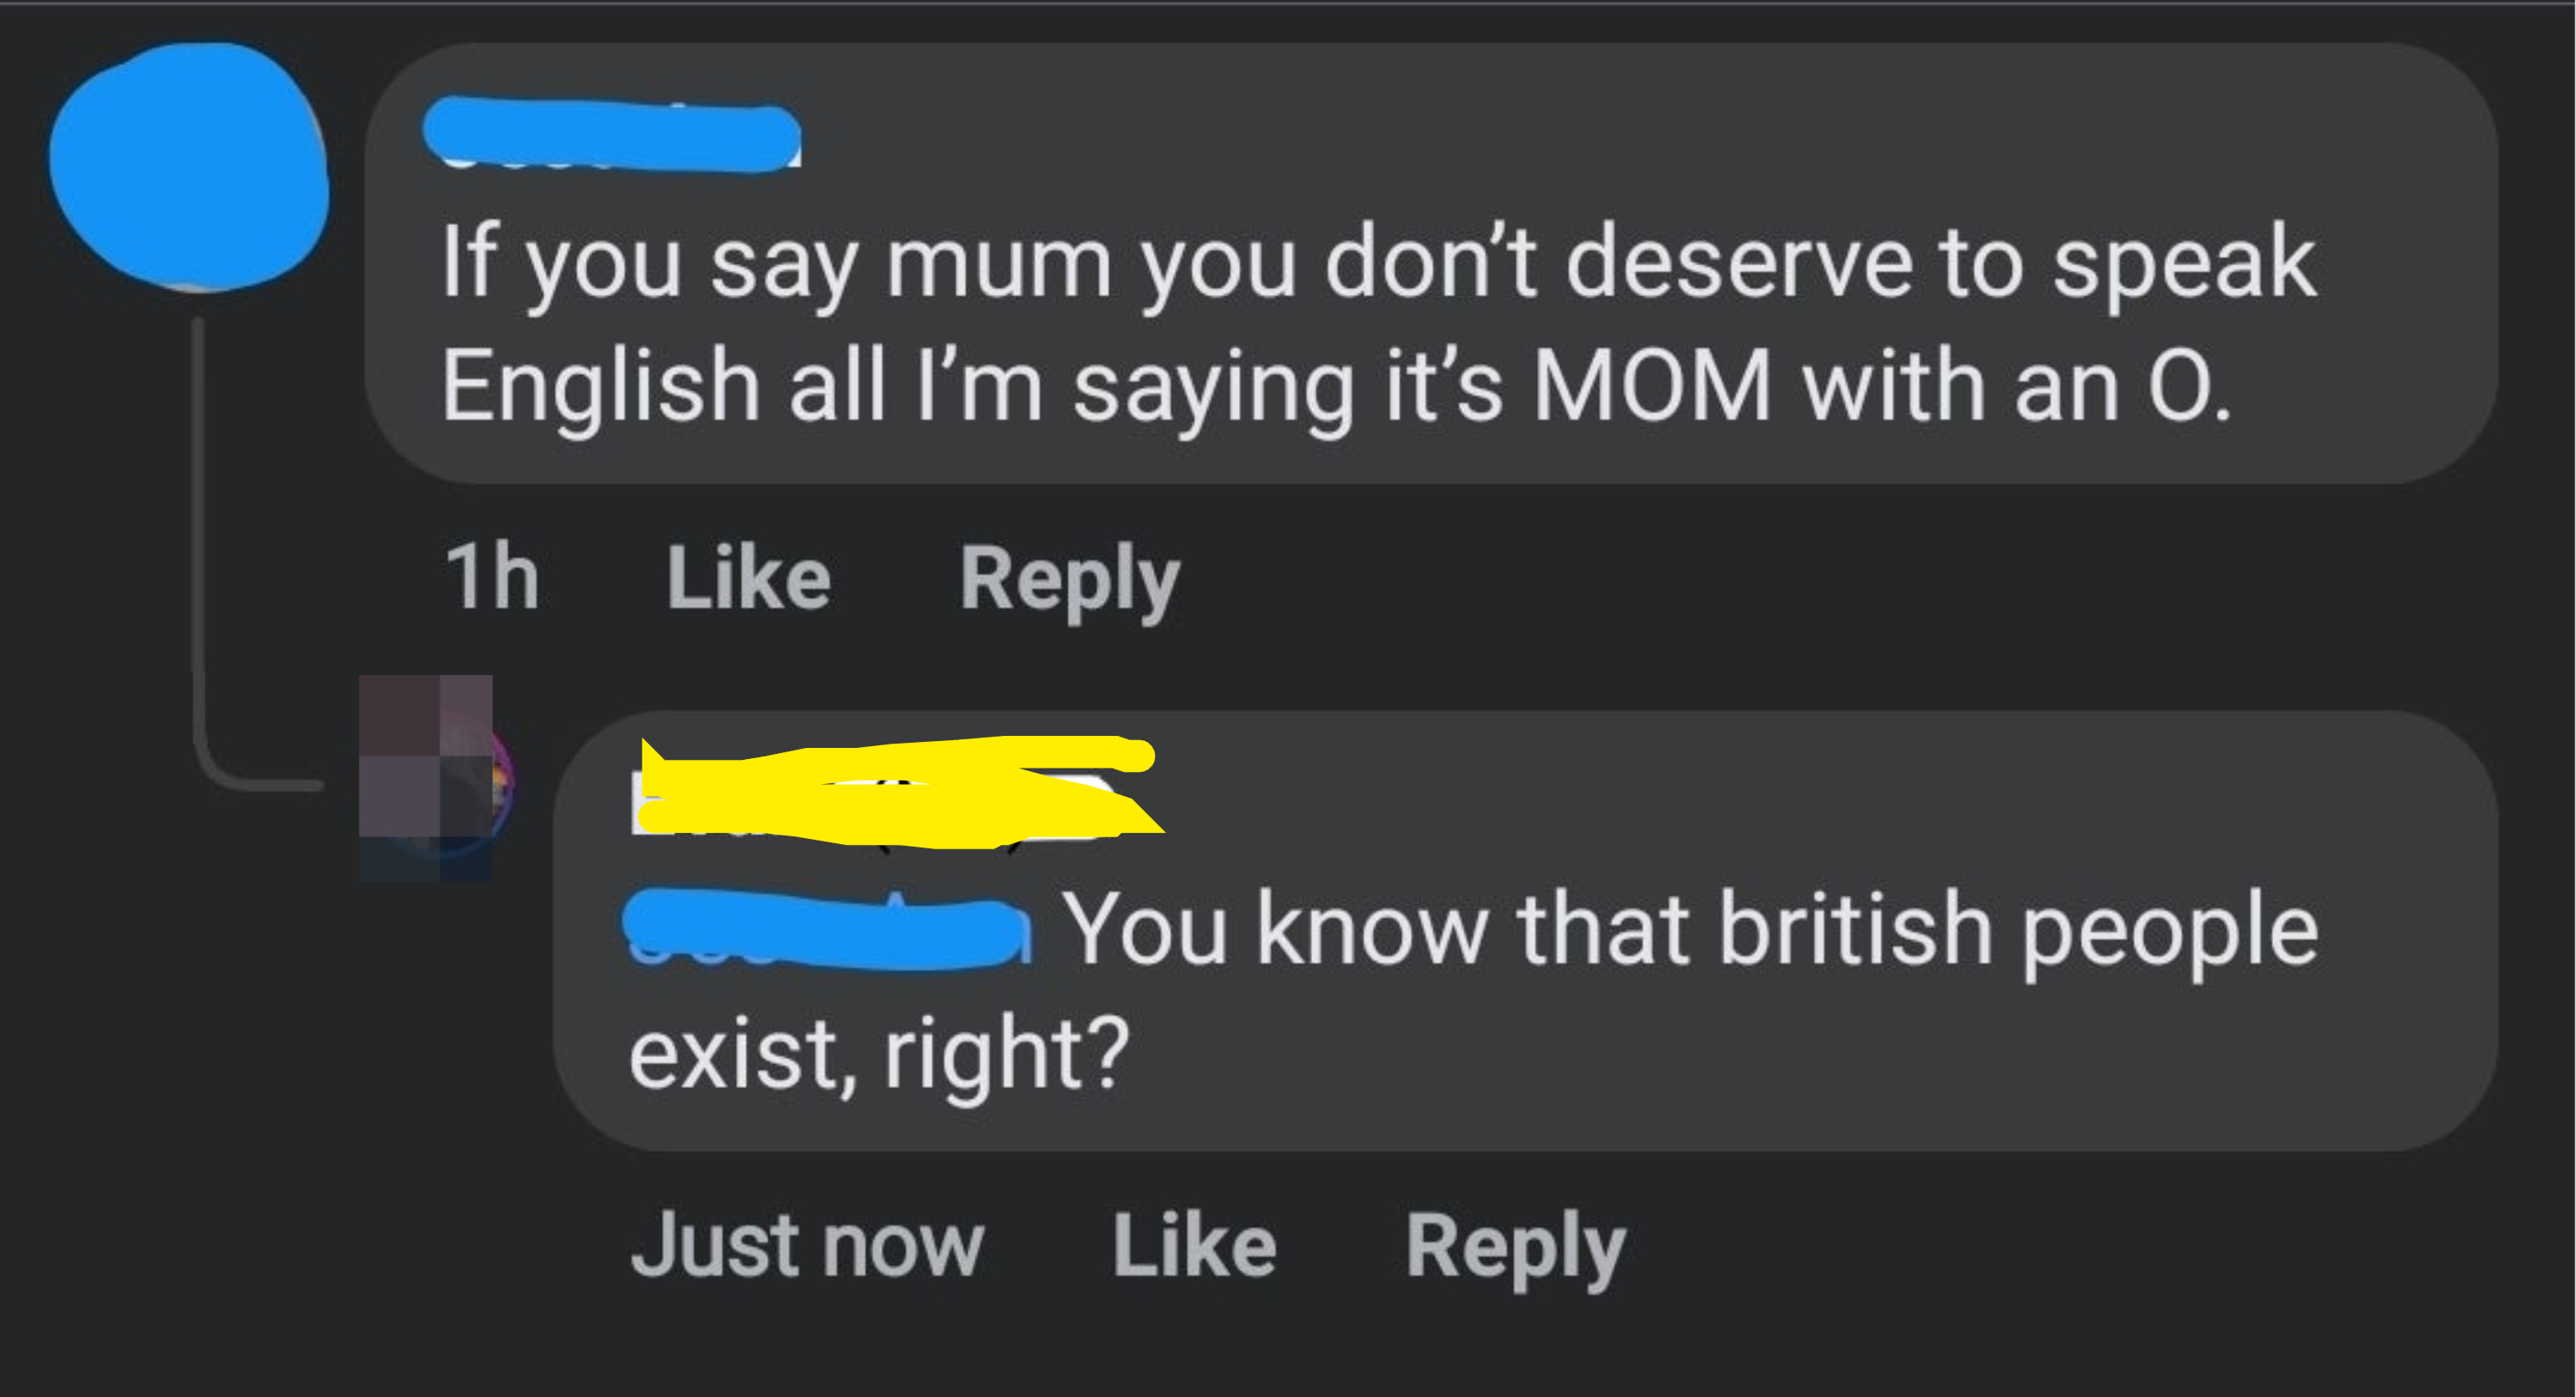 &quot;If you say mum you don&#x27;t deserve to speak English all I&#x27;m saying it&#x27;s MOM with an O&quot; and &quot;You know that British people exist, right?&quot;